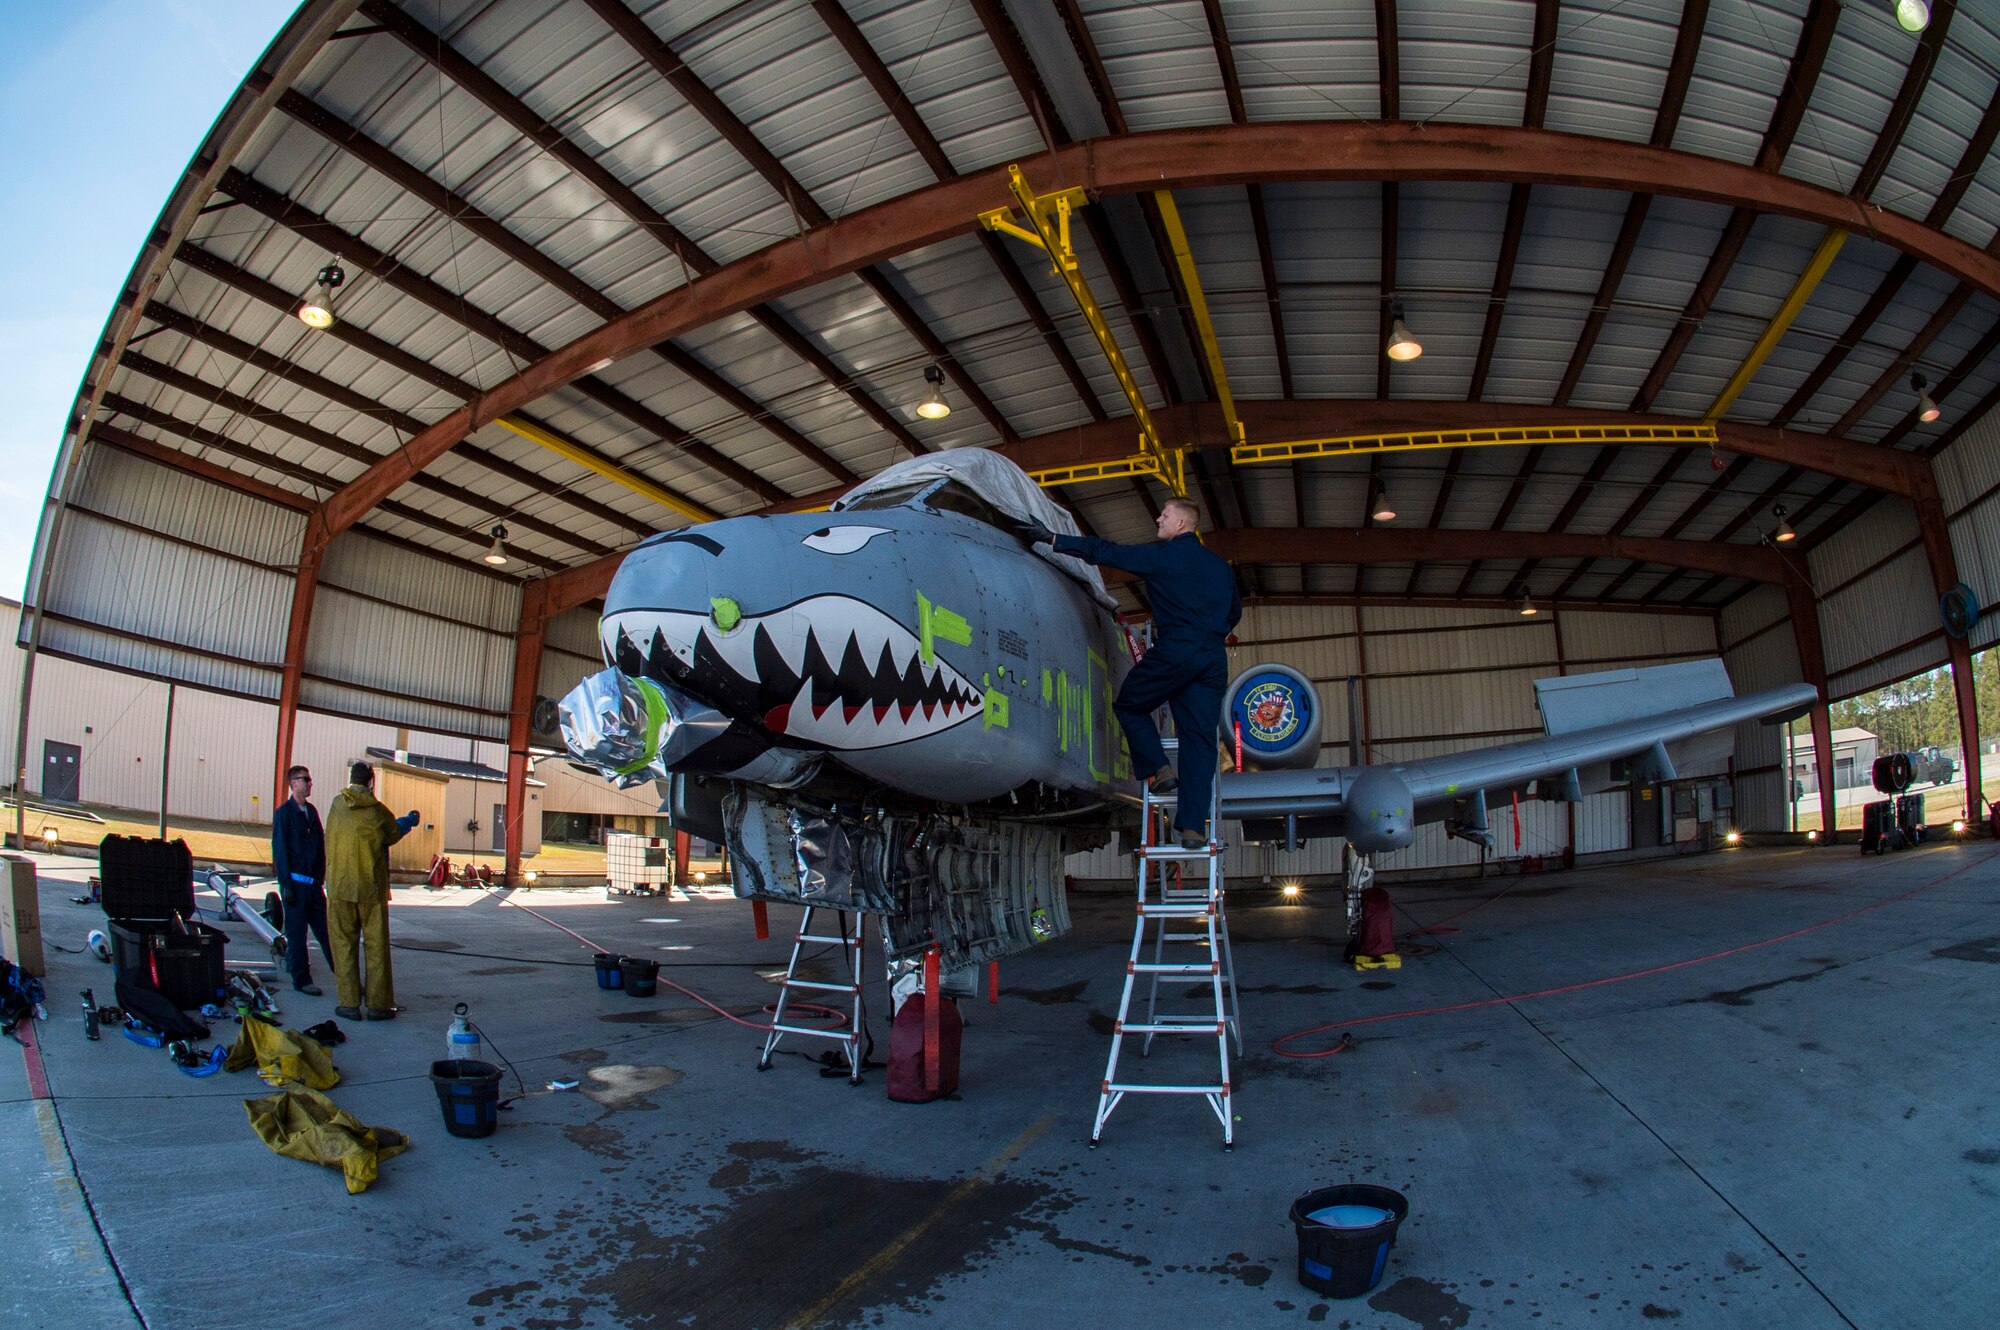 Airmen prepare an A-10C Thunderbolt II for a wash, Feb. 8, 2018, at Moody Air Force Base, Ga.In addition to mechanical and electrical maintenance, A-10’s must be washed every 180 days or approximately 1,000 flying hours in order to control corrosion caused by residue from the gun and engine exhaust. (U.S. Air Force photo by Senior Airman Janiqua P. Robinson)